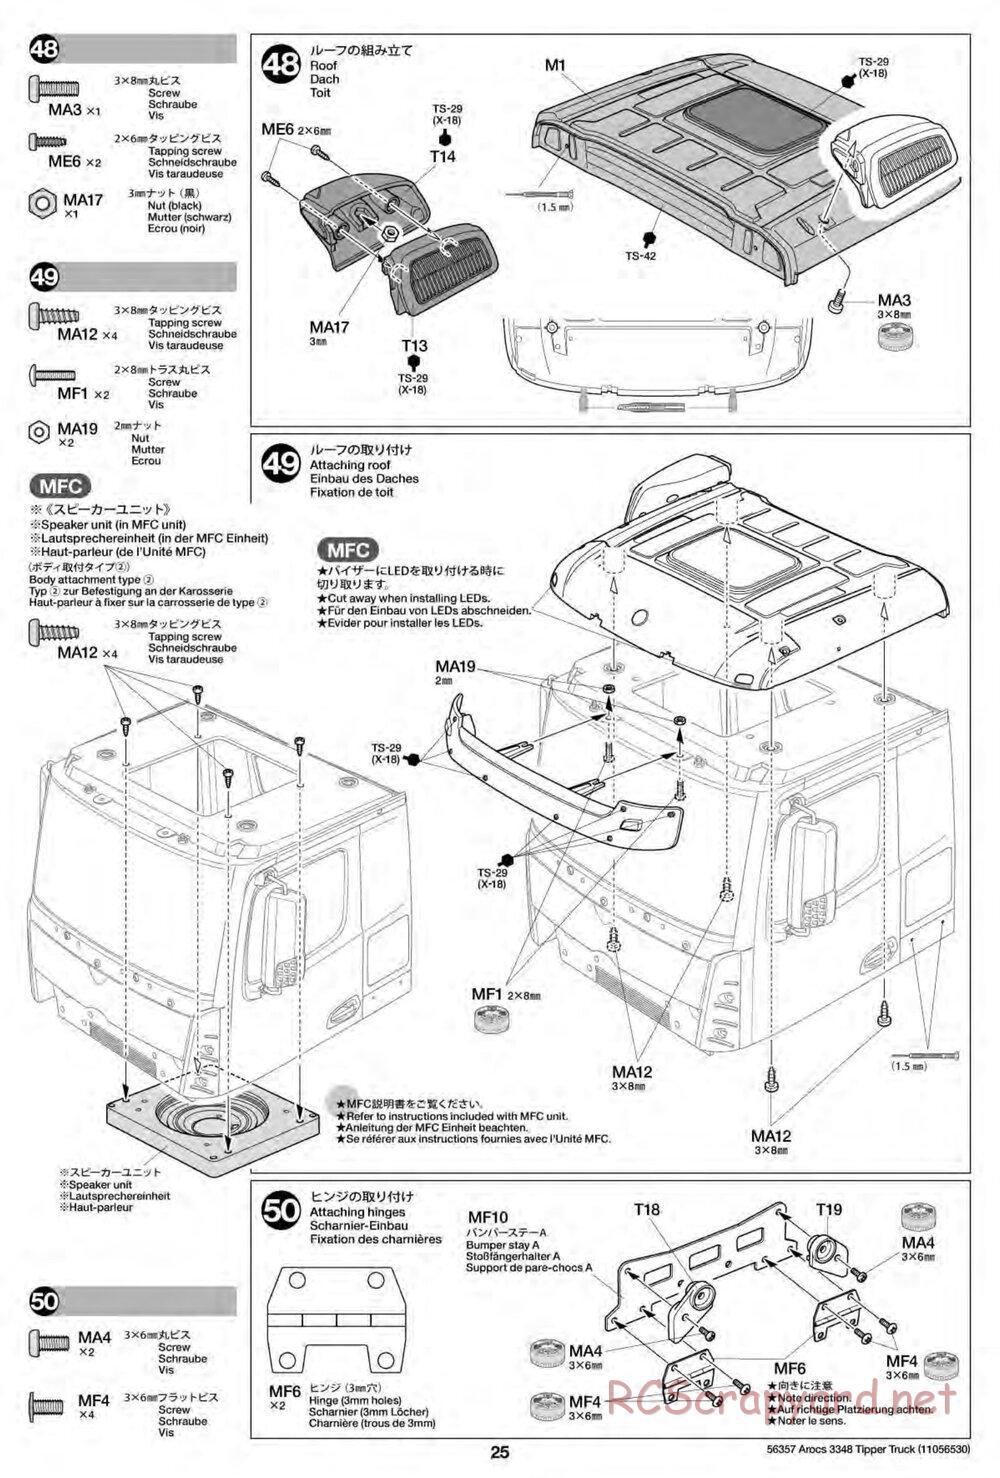 Tamiya - Mercedes-Benz Arocs 3348 6x4 Tipper Truck Chassis - Manual - Page 25